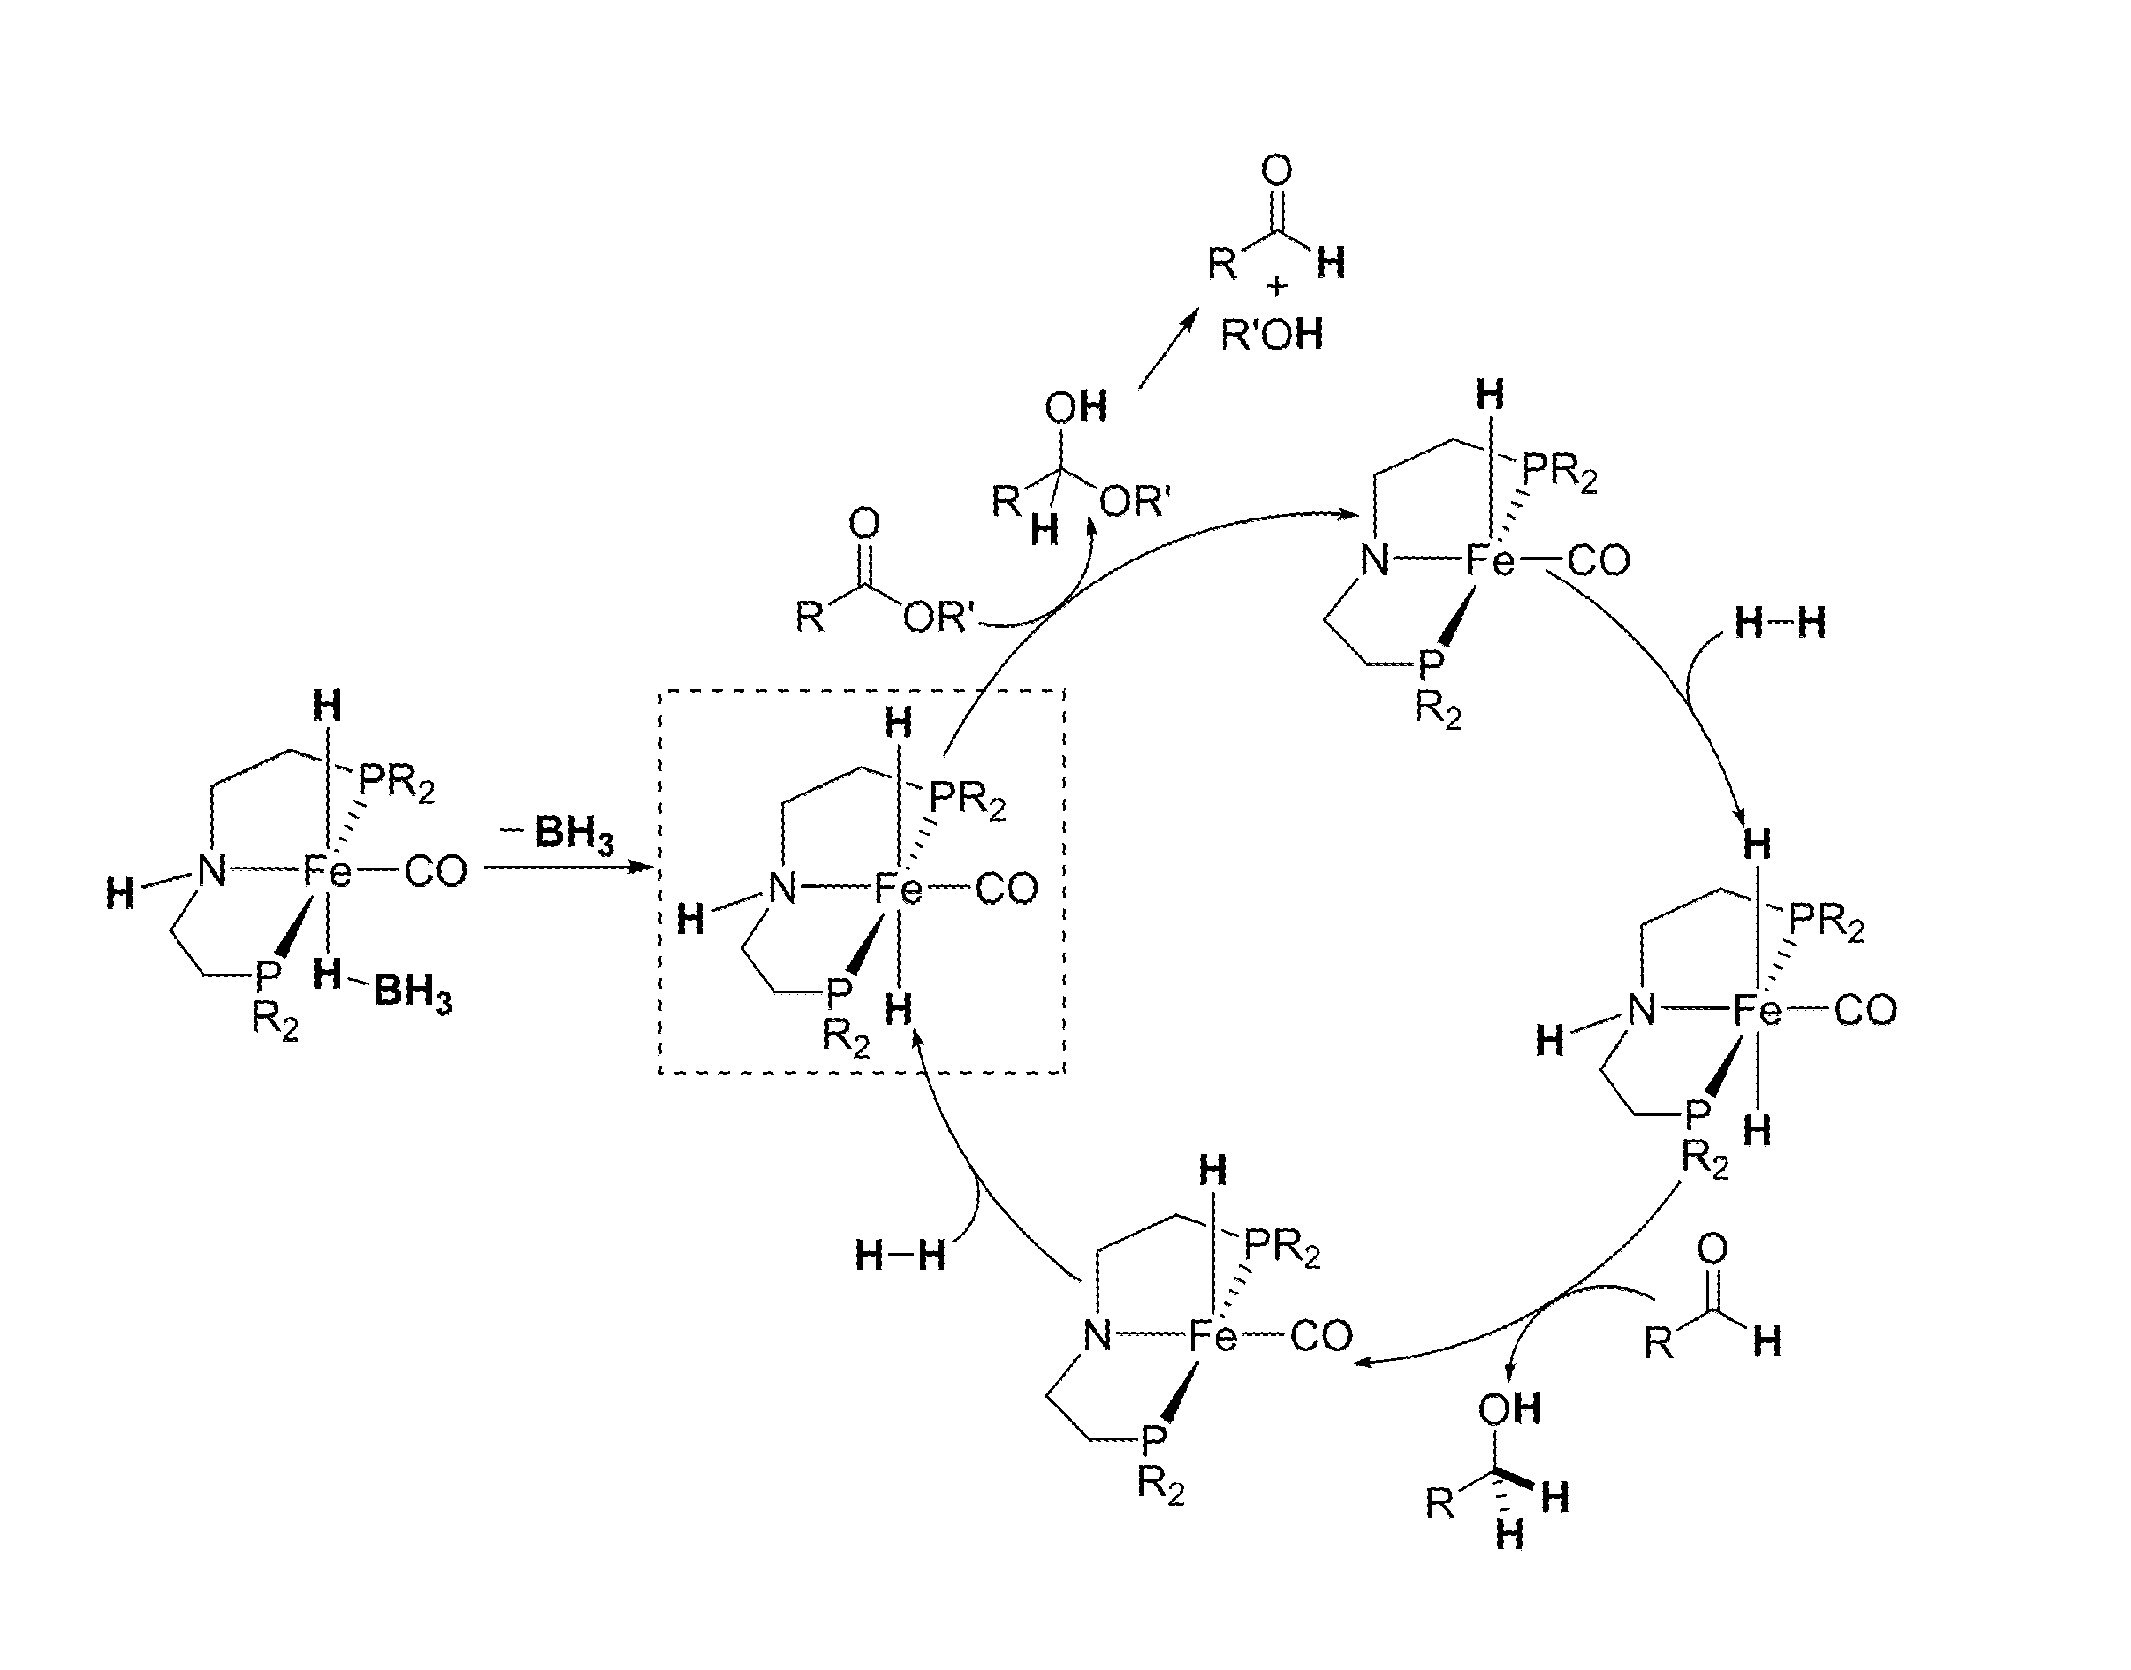 Homogeneous Hydrogenation of Esters Employing a Complex of Iron as Catalyst